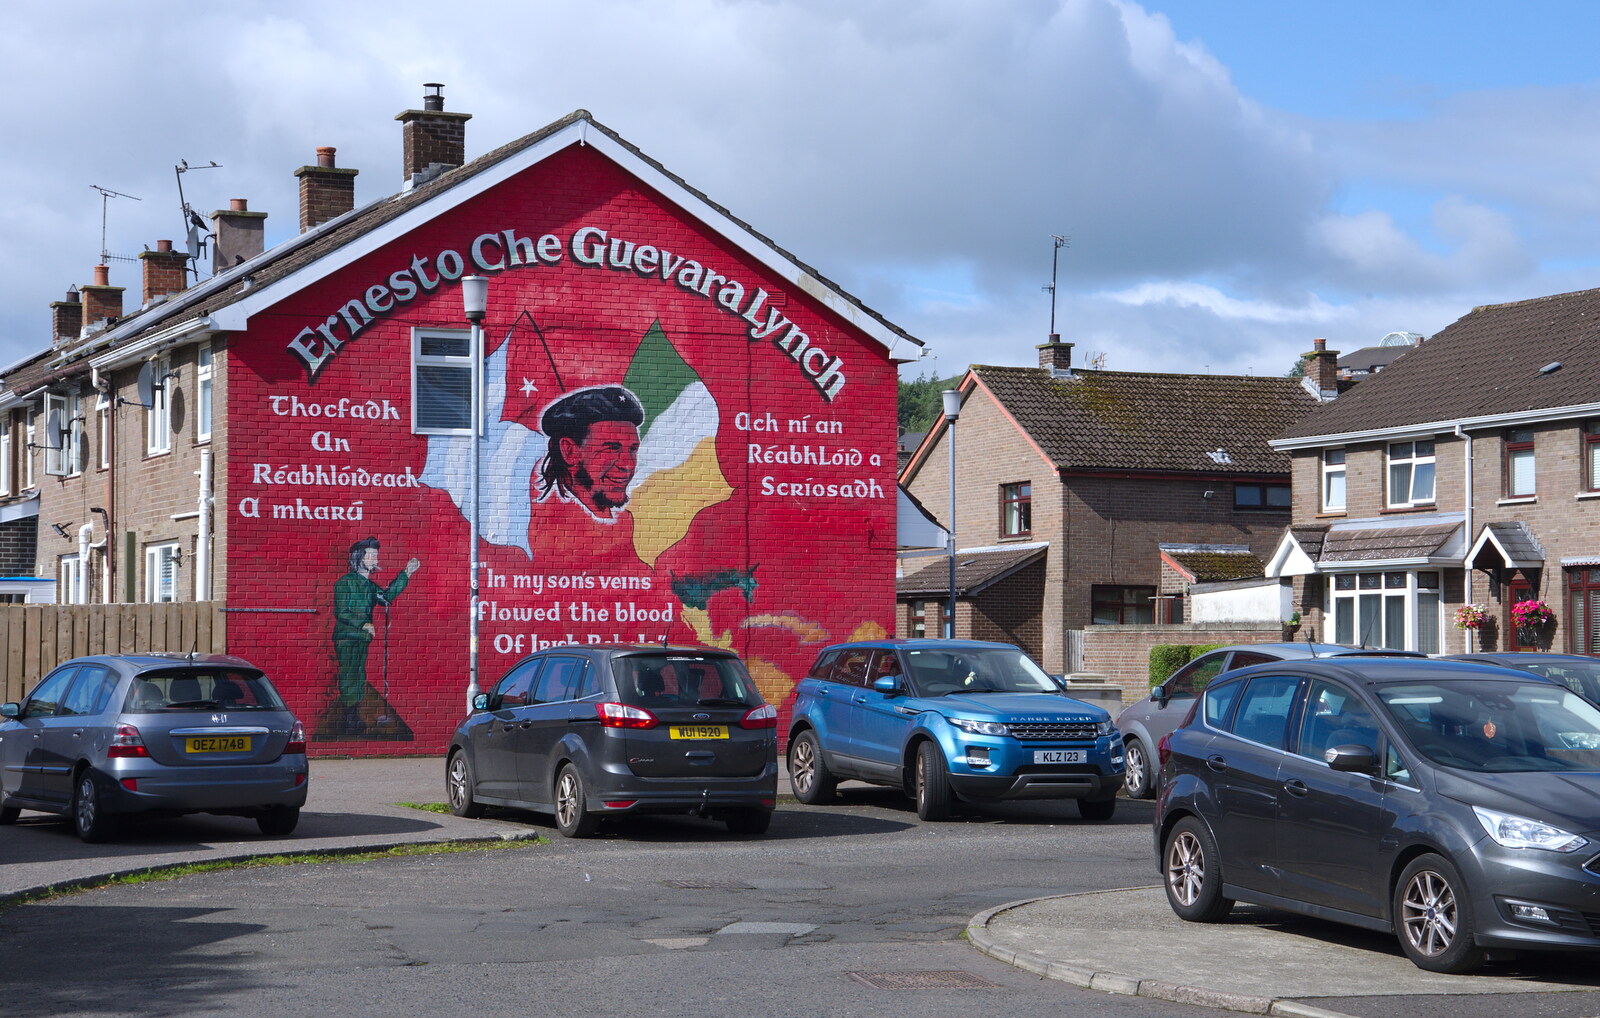 A mural dedicated to Ernesto 'Che Guevara' Lynch from A Day in Derry, County Londonderry, Northern Ireland - 15th August 2019